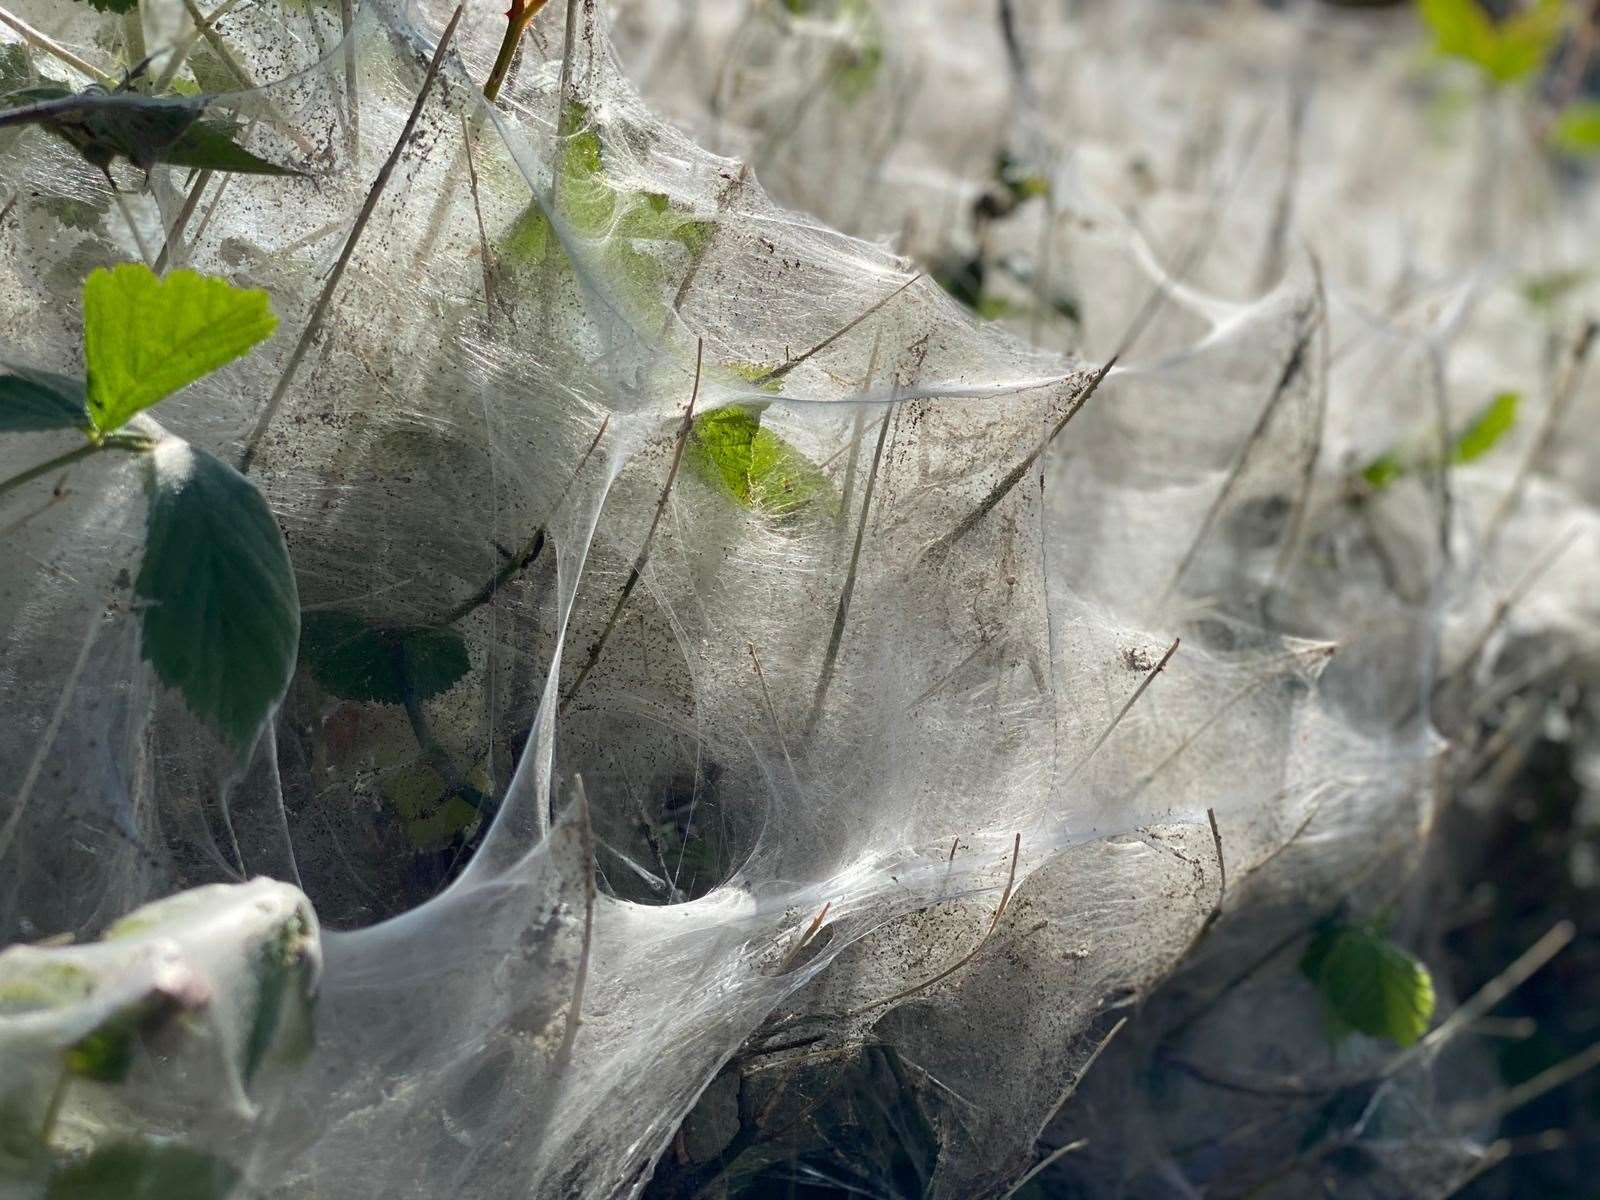 The caterpillars create a fine web to protect themselves and their food. Photo: Tara Cockell